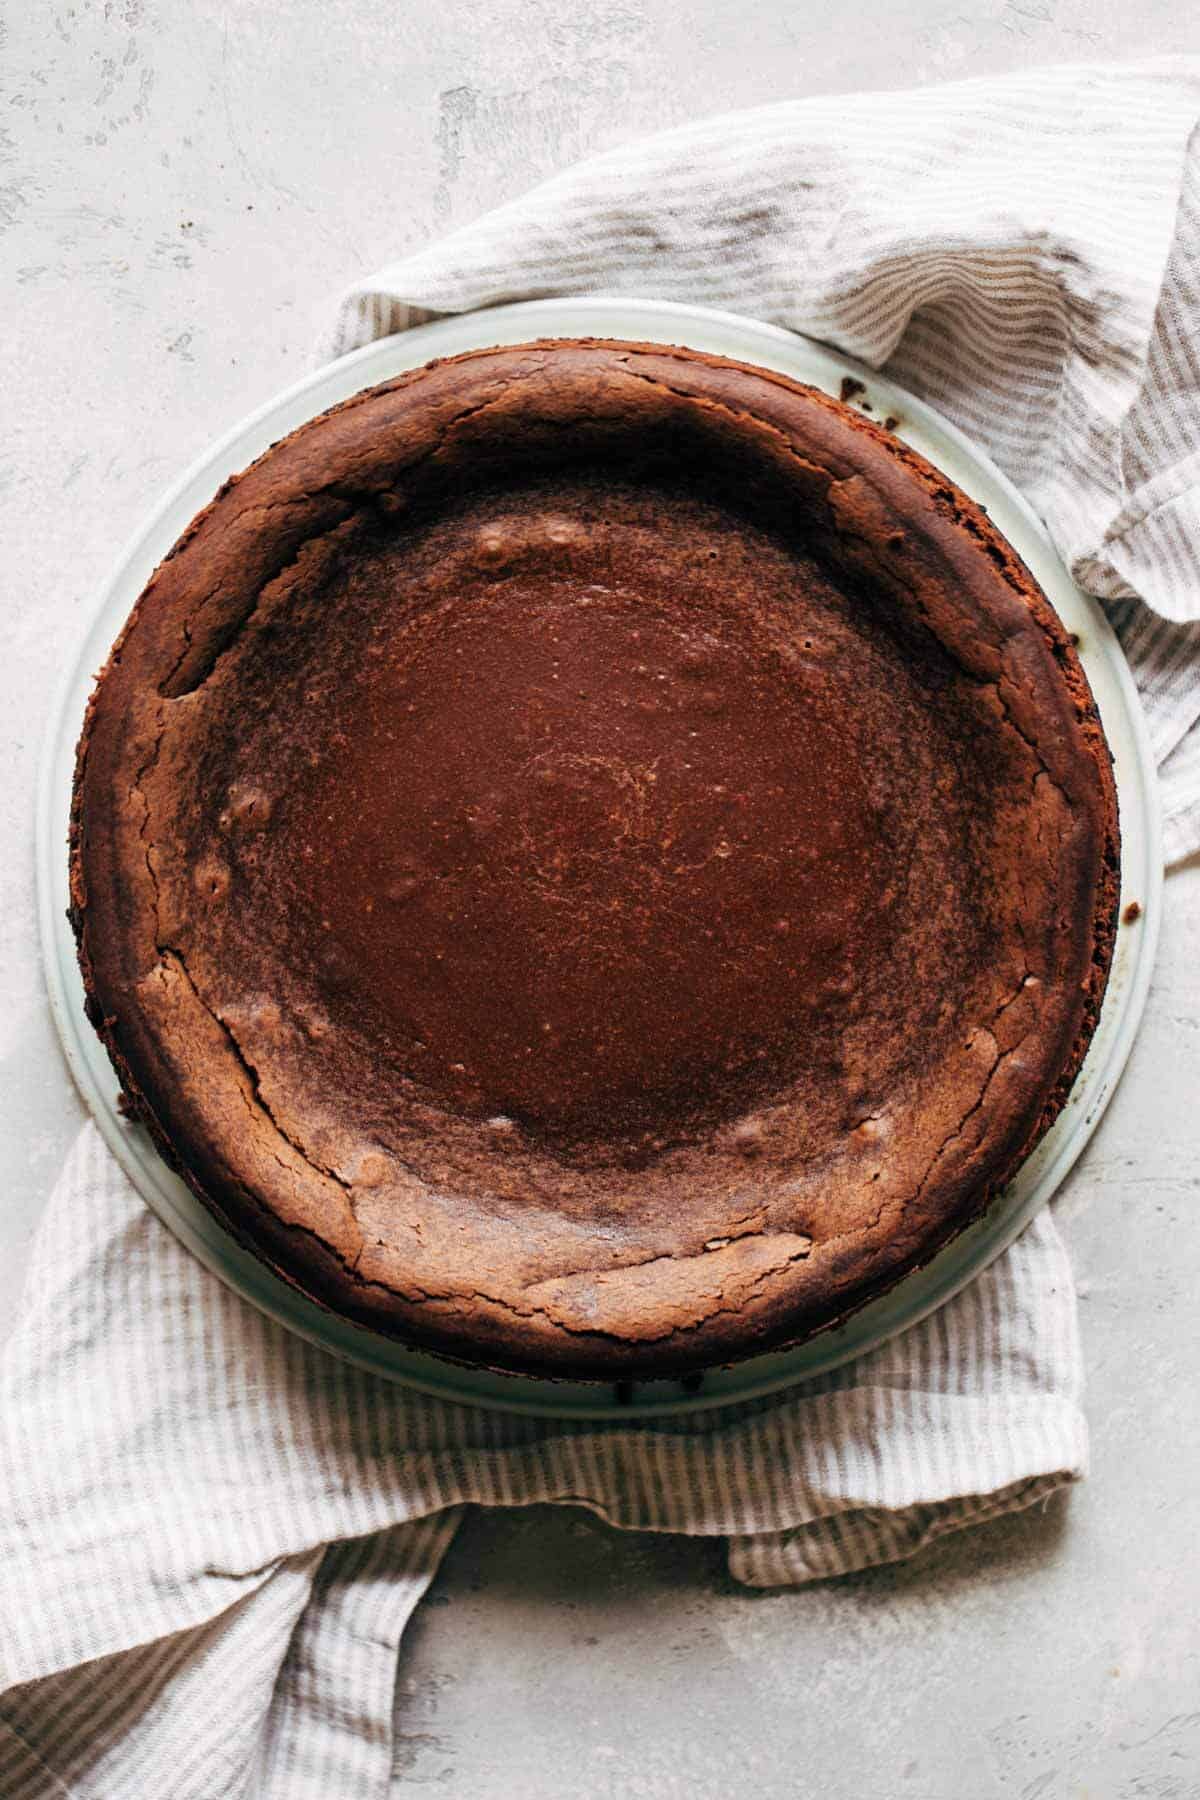 baked chocolate cheesecake removed from the tin